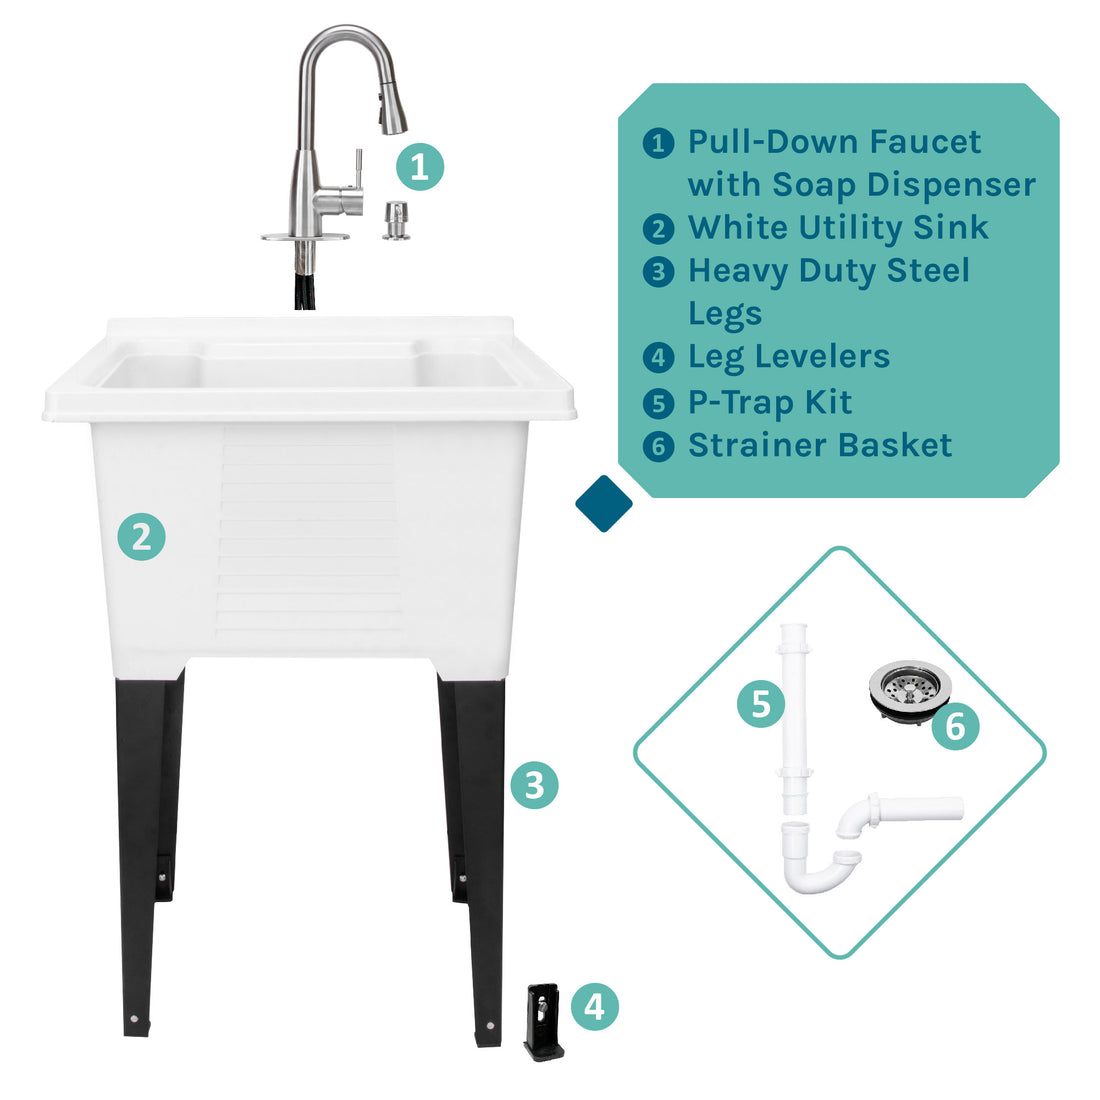 Tehila Luxe Freestanding White Utility Sink with Stainless Steel Finish Low-Profile Pull-Down Faucet - Utility sinks vanites Tehila